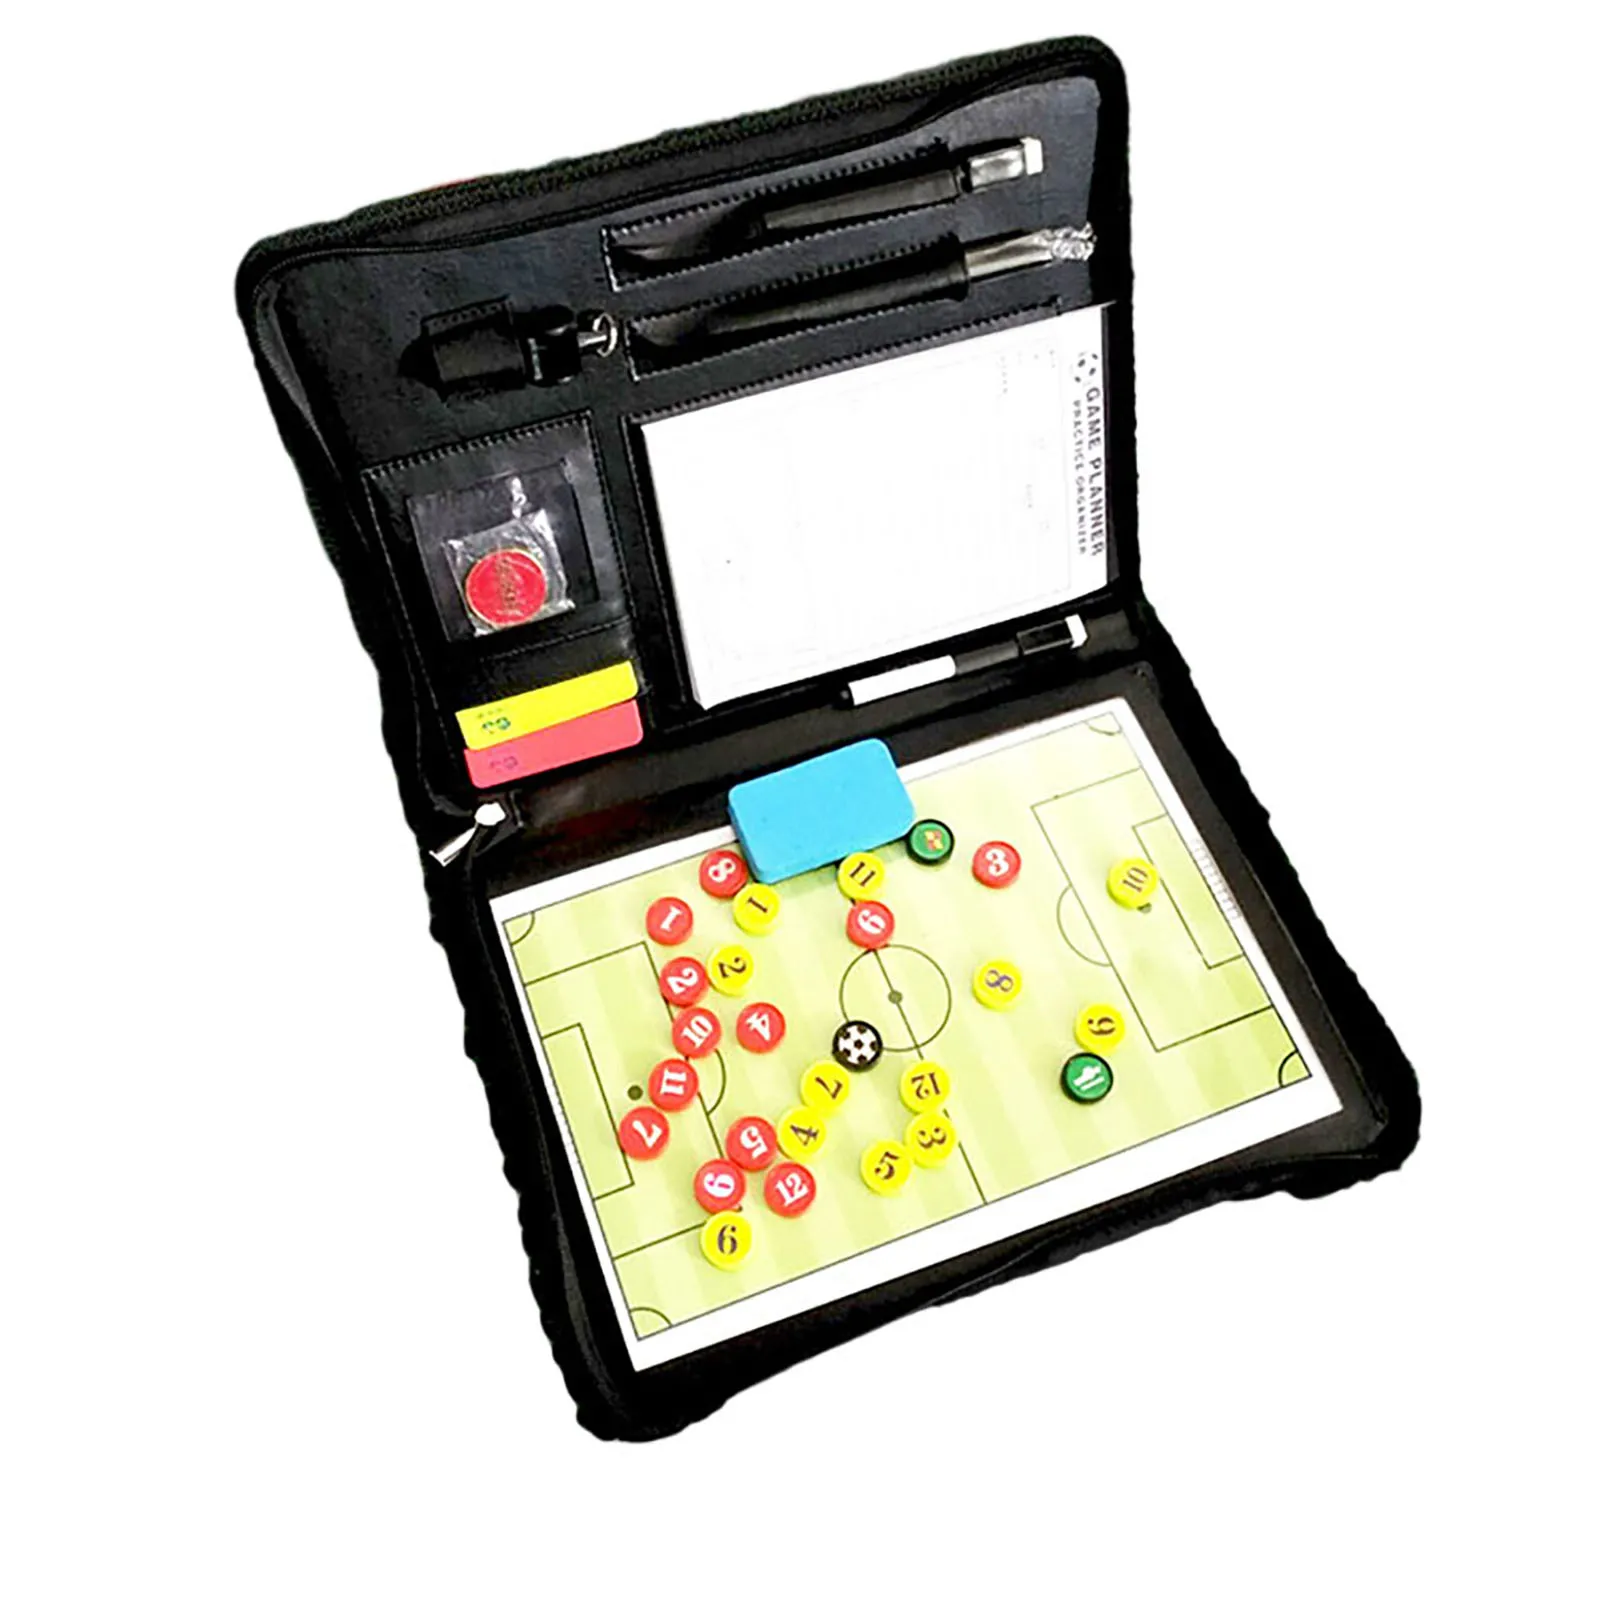 

Soccer Coaching Board Portable Football Training Clipboard for Coaches and Players